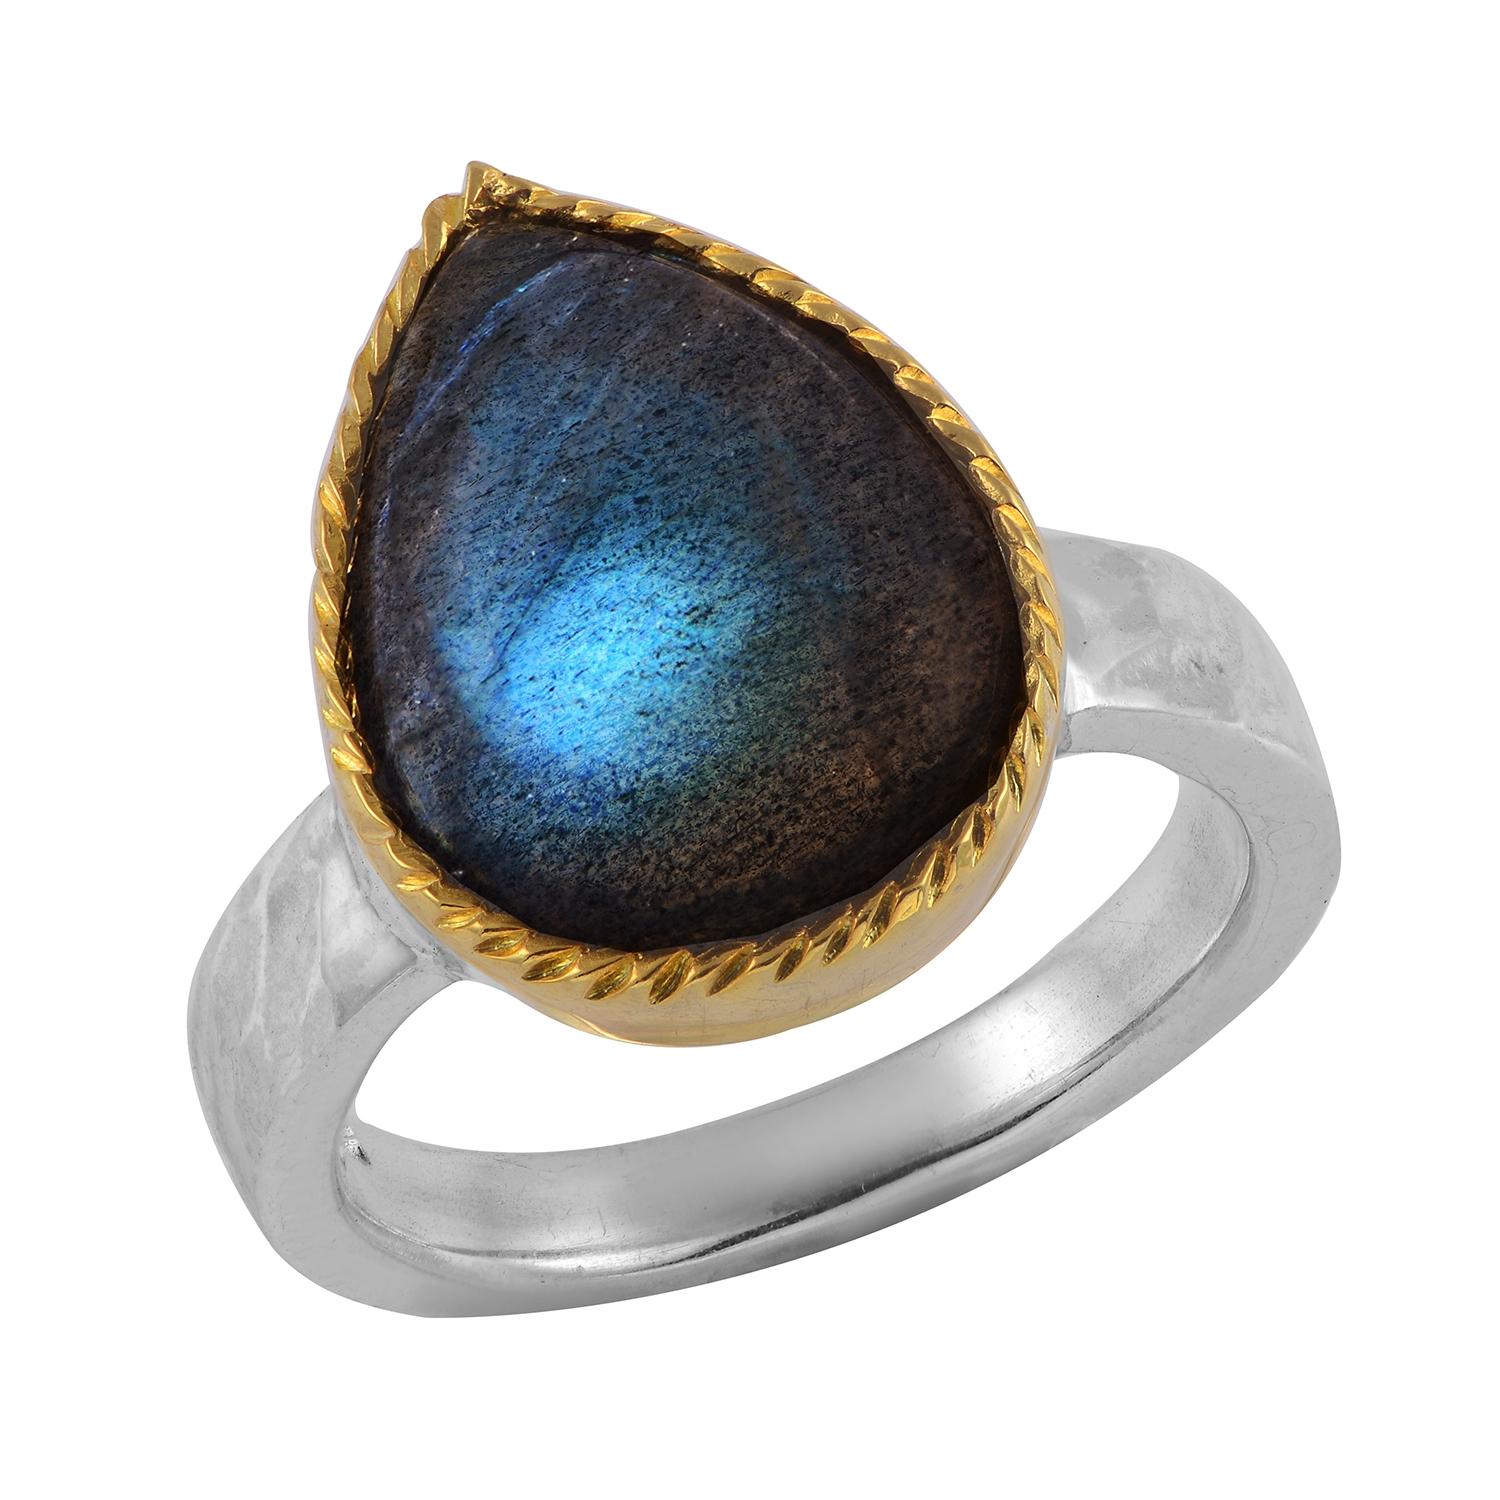 This adorable labradorite teardrop shaped ring is from a limited edition. Handmade in our workshops the ring is made in sterling silver with a hammered shank and the top of the ring is coated in 24ct gold plate.

Dimensions 20mm x 15mm
It is part of